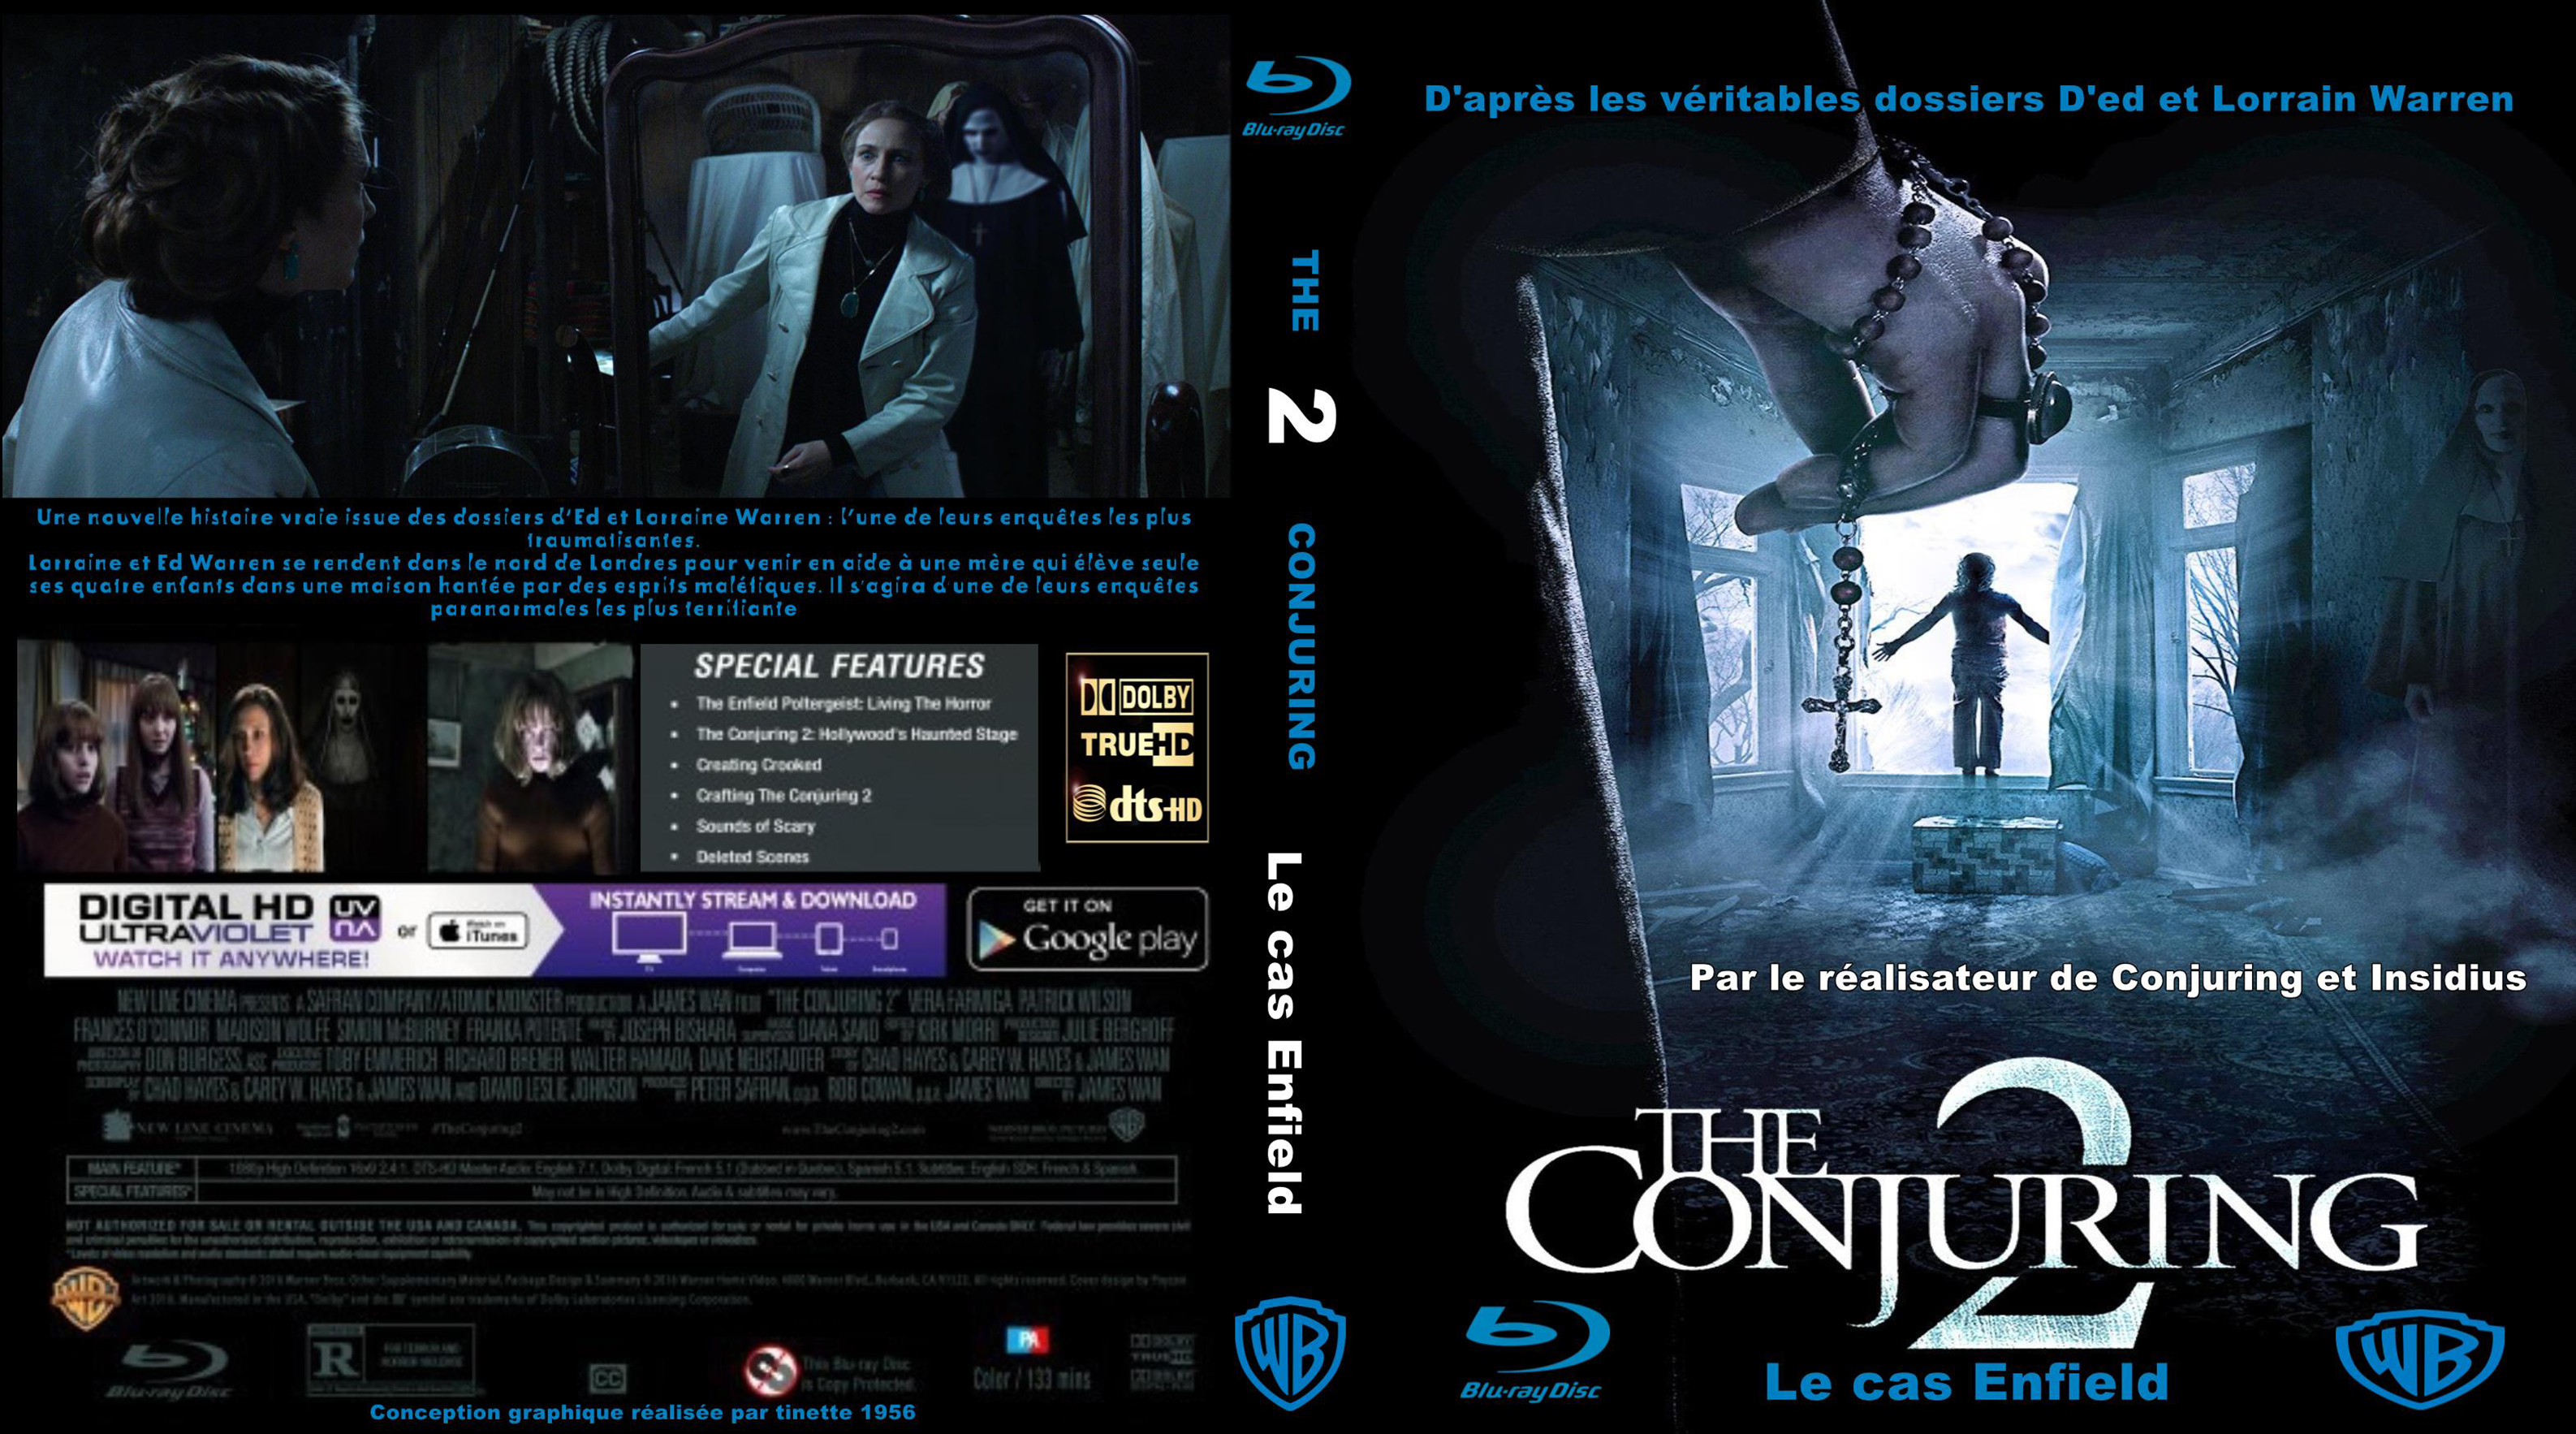 Jaquette DVD Conjuring 2 : Le Cas Enfield custom (BLU-RAY)